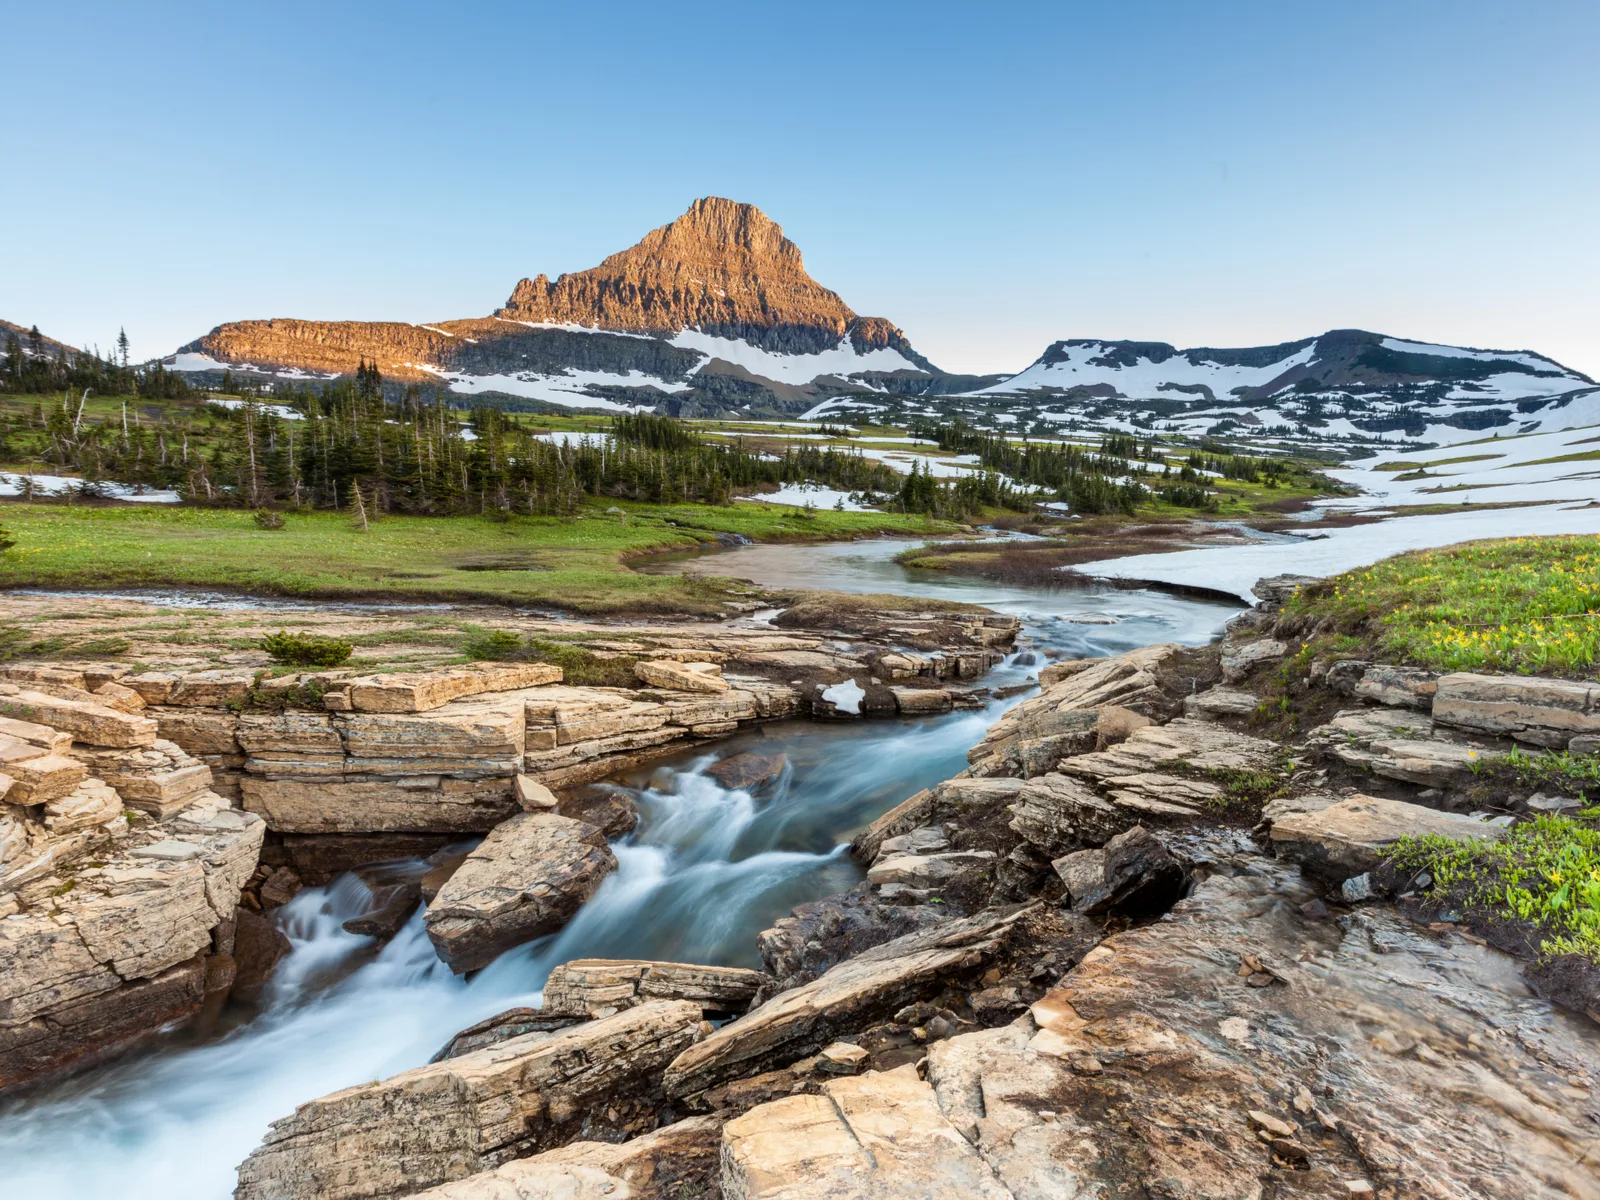 Logan Pass pictured during the Least Busy Time to Visit Glacier National Park